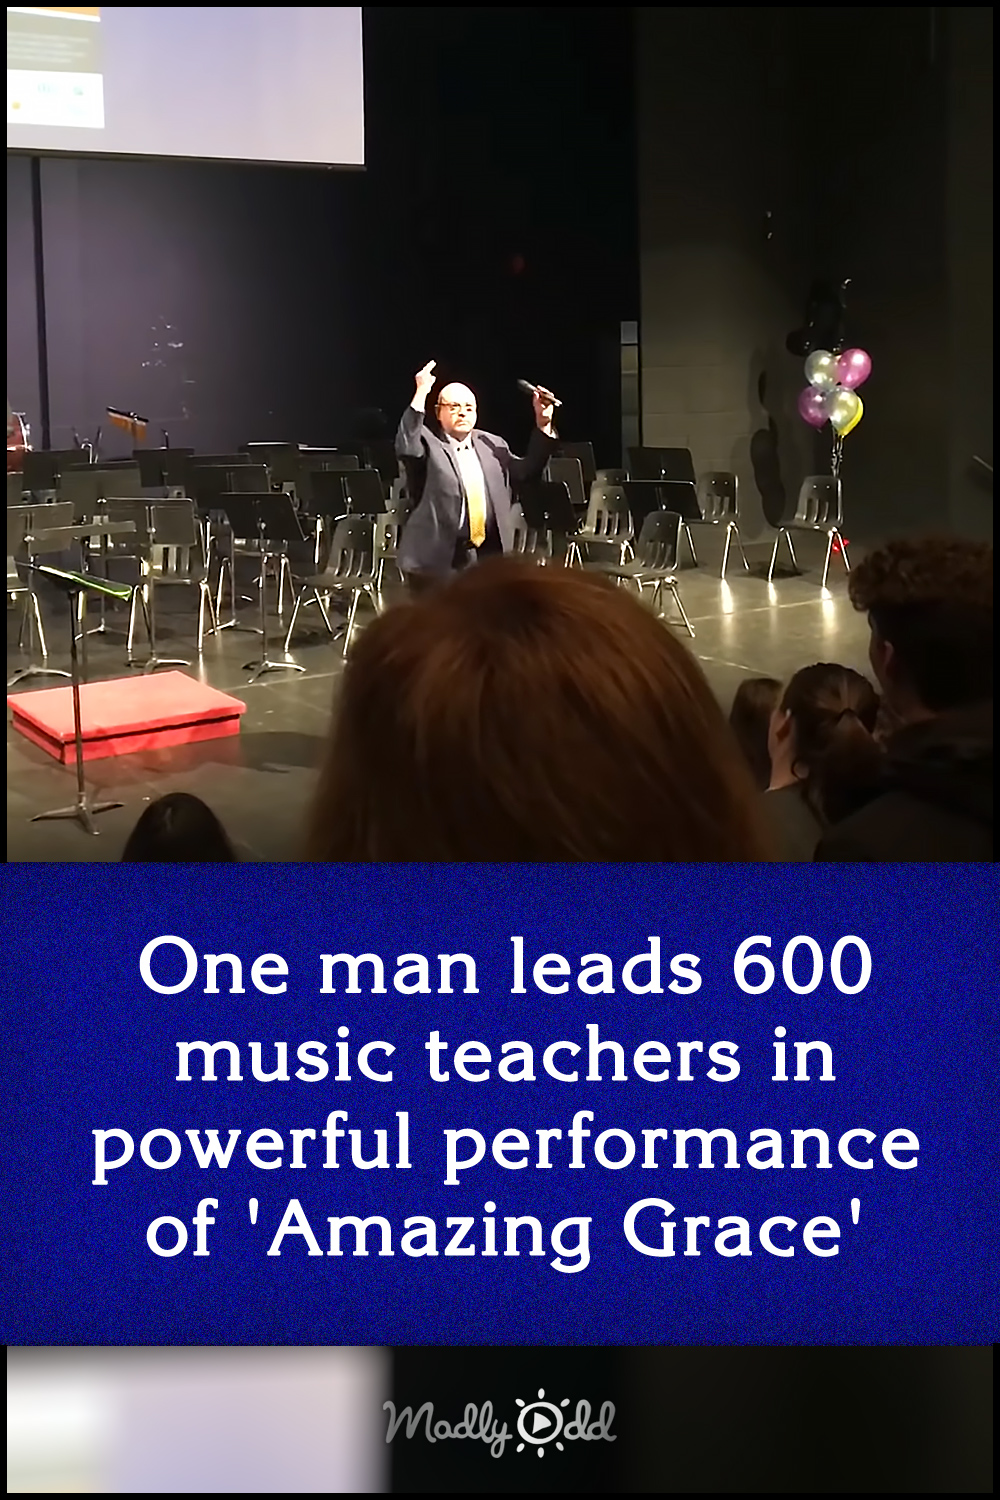 One man leads 600 music teachers in powerful performance of \'Amazing Grace\'